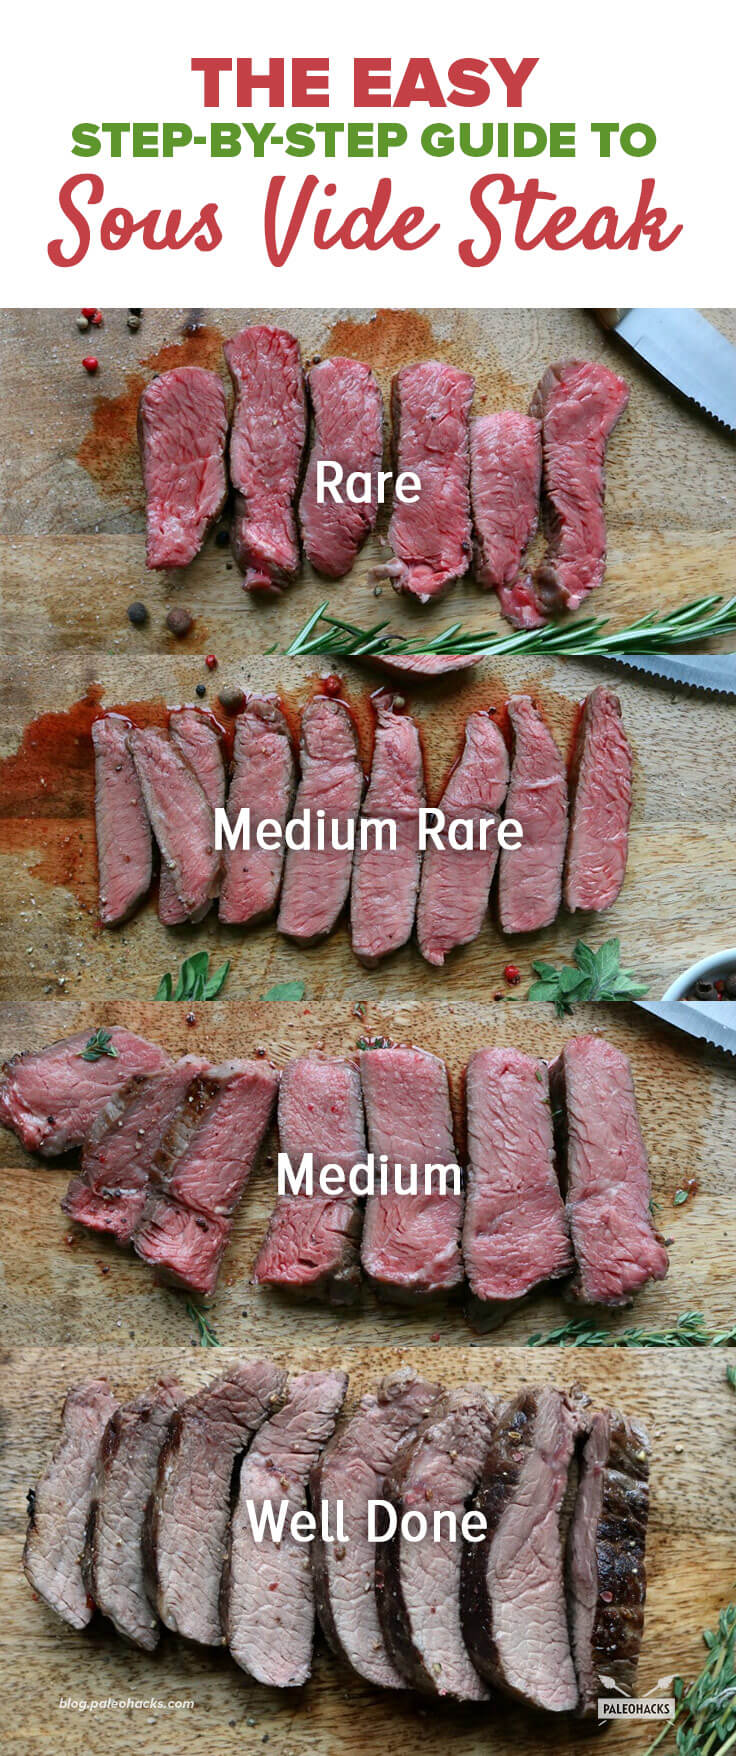 Reduktion Fascinate panel The Easy Step-by-Step Guide to Sous Vide Steak | PaleoHacks